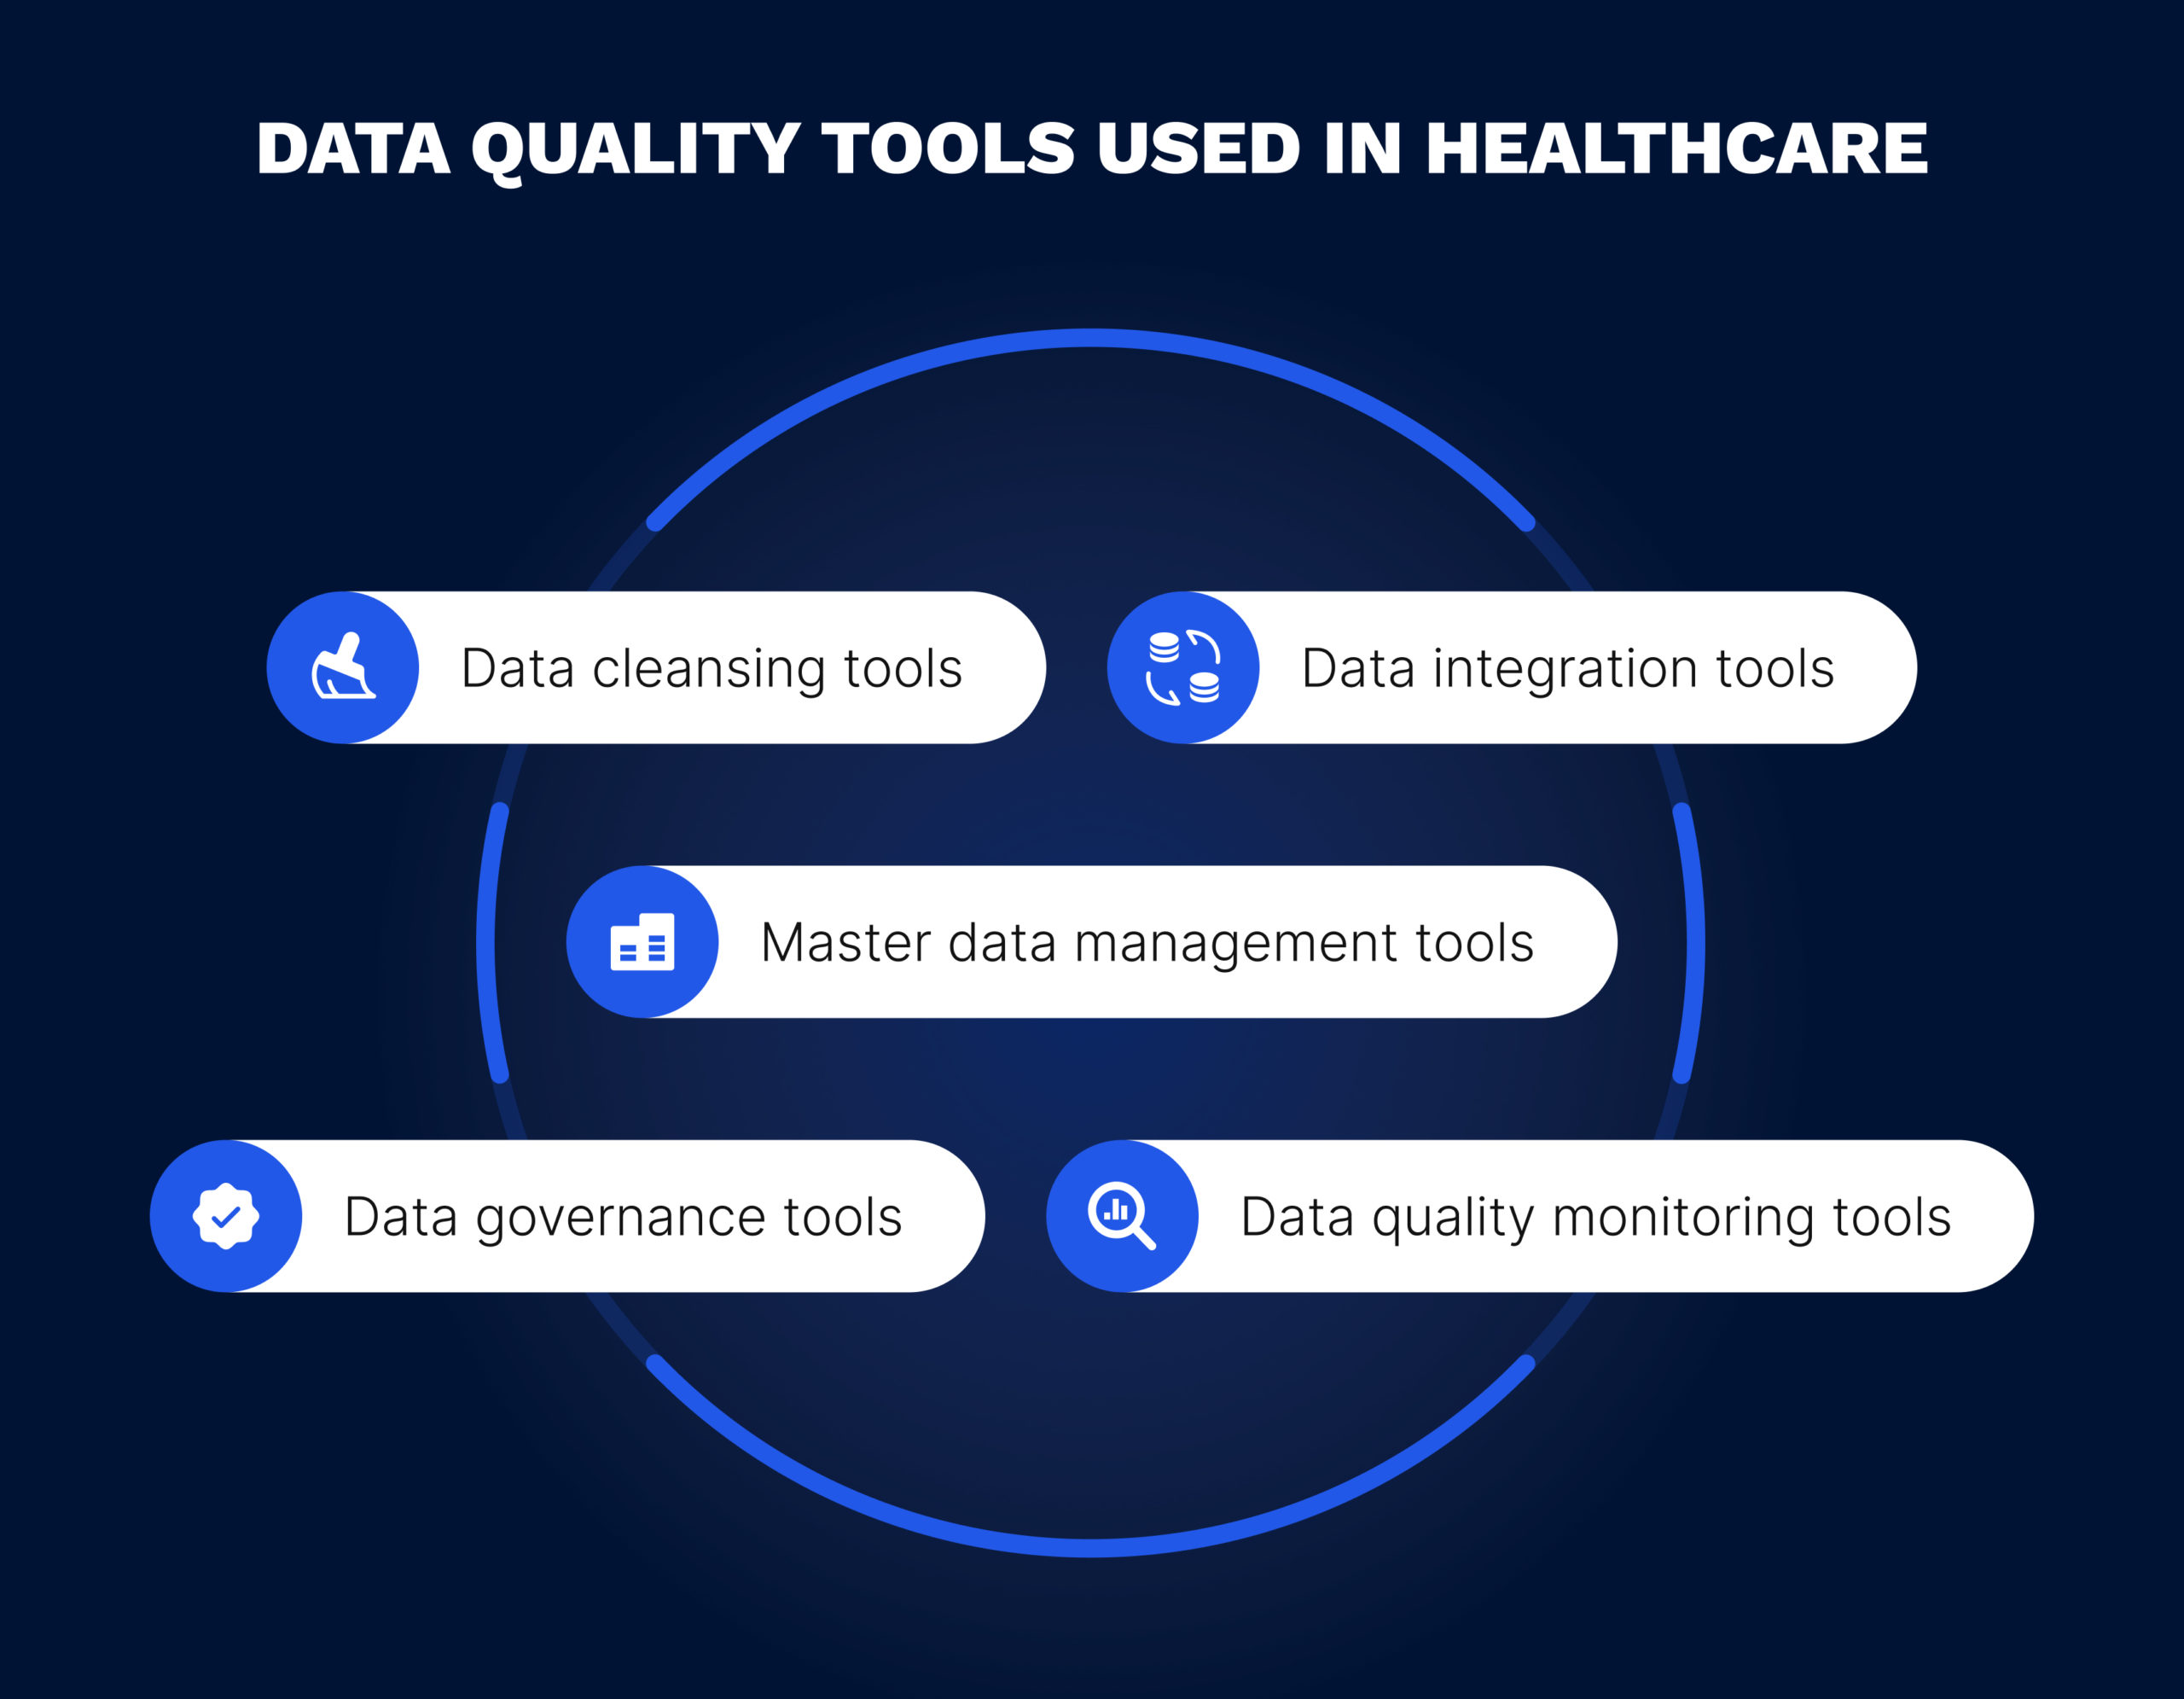 Top 5 data quality tools used in healthcare